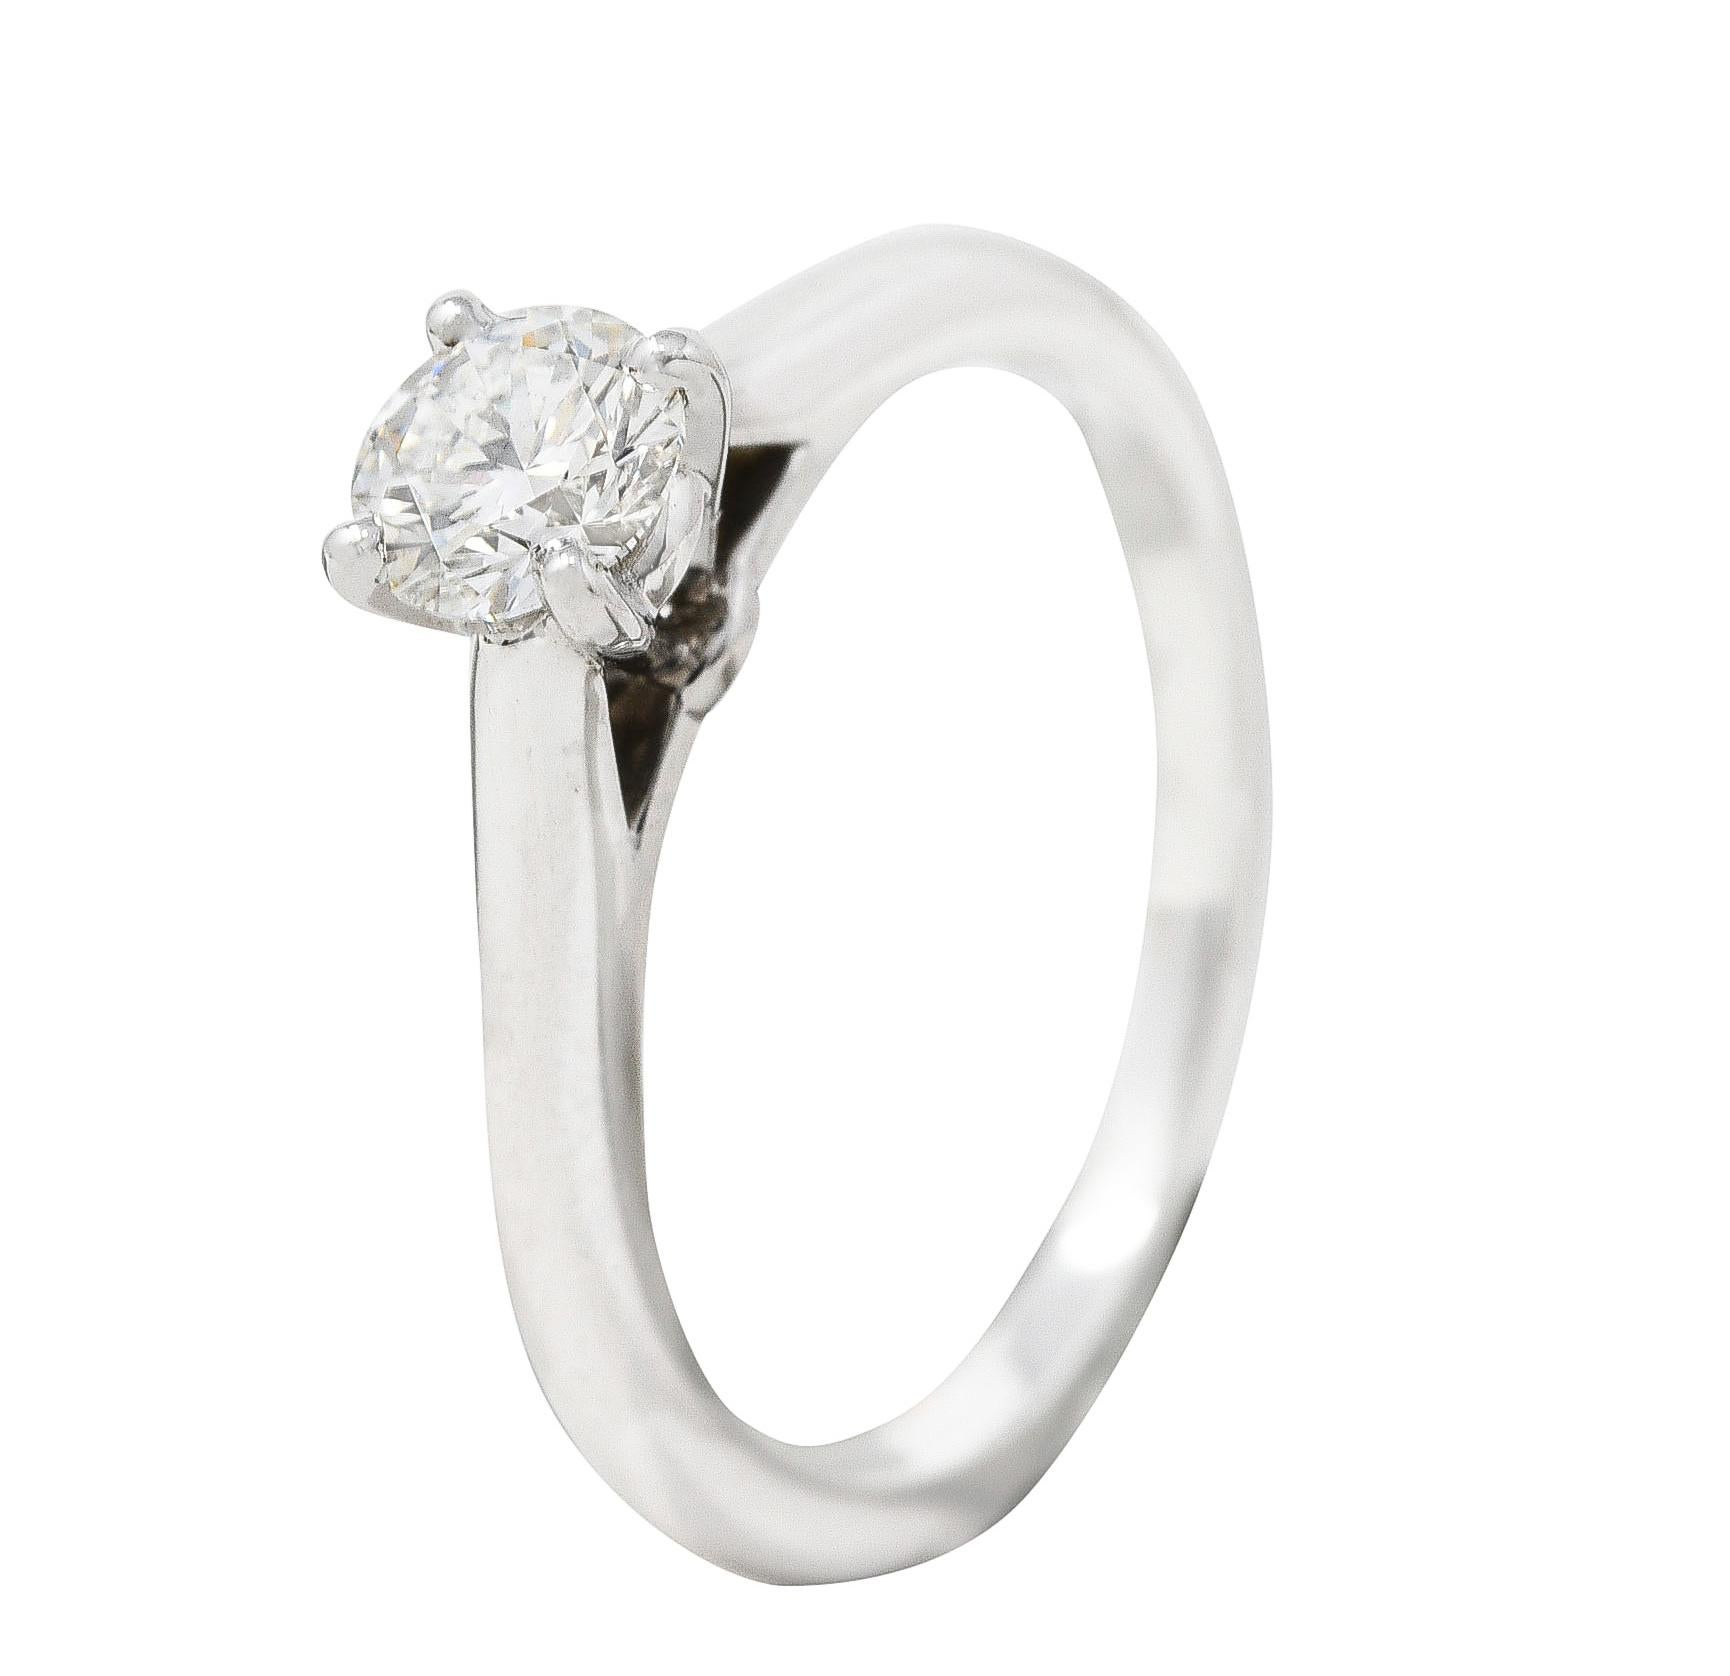 Centering a round brilliant cut diamond weighing 0.38 carat total - G color with VVS2 clarity. Prong set in a sleek basket and flanked by cathedral shoulders. Completed by high polished finish. Stamped for platinum and inscribed with carat weight.